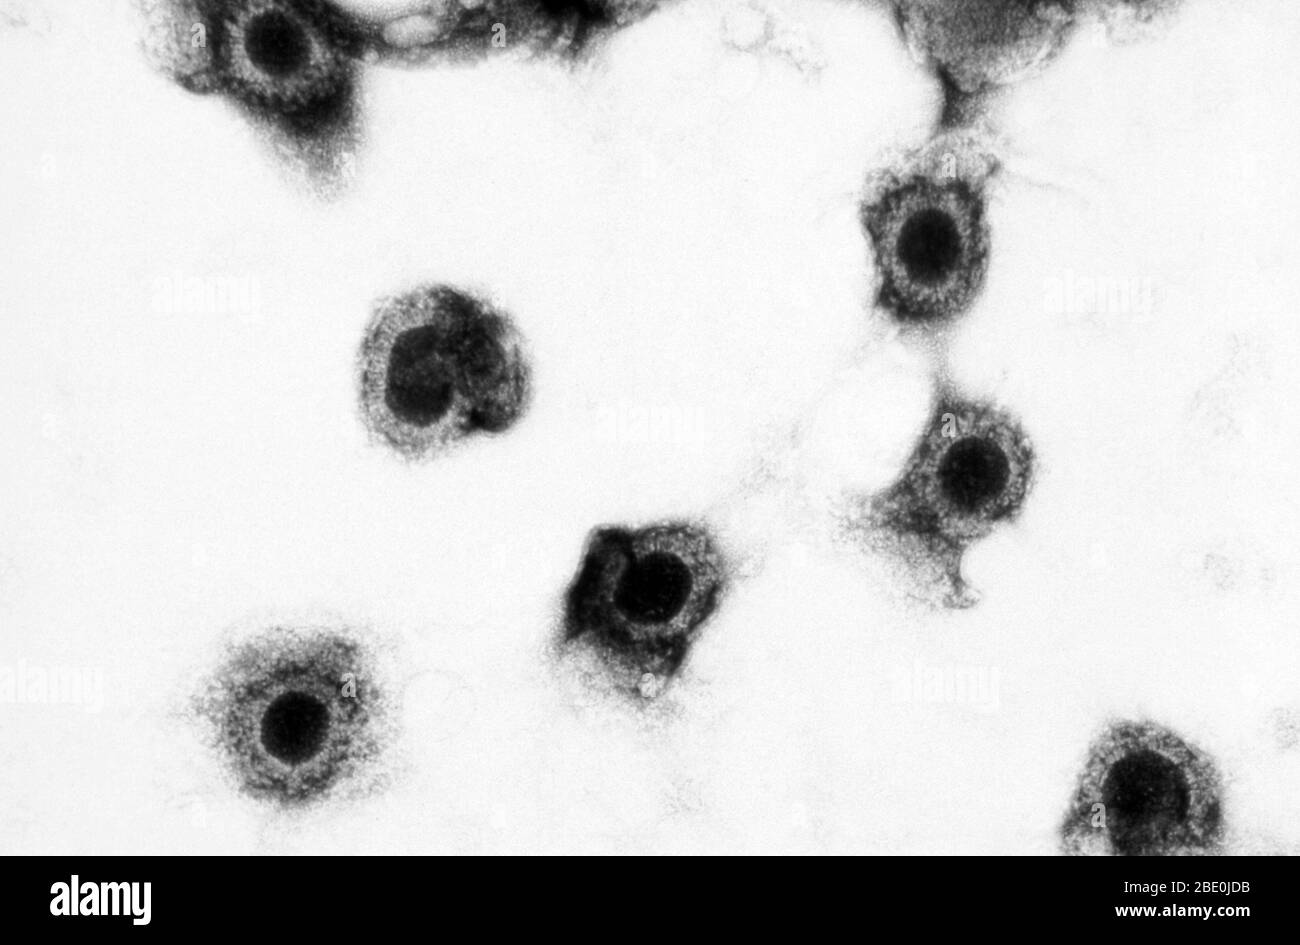 Transmission Electron Micrograph (TEM) shows a number of cytomegalovirus virions present in an unknown tissue sample. Cytomegalovirus (CMV)  is a genus of viruses in the order Herpesvirales, in the family Herpesviridae, in the subfamily Betaherpesvirinae. Humans and monkeys serve as natural hosts. Cytomegalovirus is a double-stranded DNA (dsDNA) virus. There are currently eight species in this genus including the type species, human cytomegalovirus (HCMV, human herpesvirus 5, HHV-5), which is the species that infects humans.  In the medical literature, most mentions of CMV without further spec Stock Photo